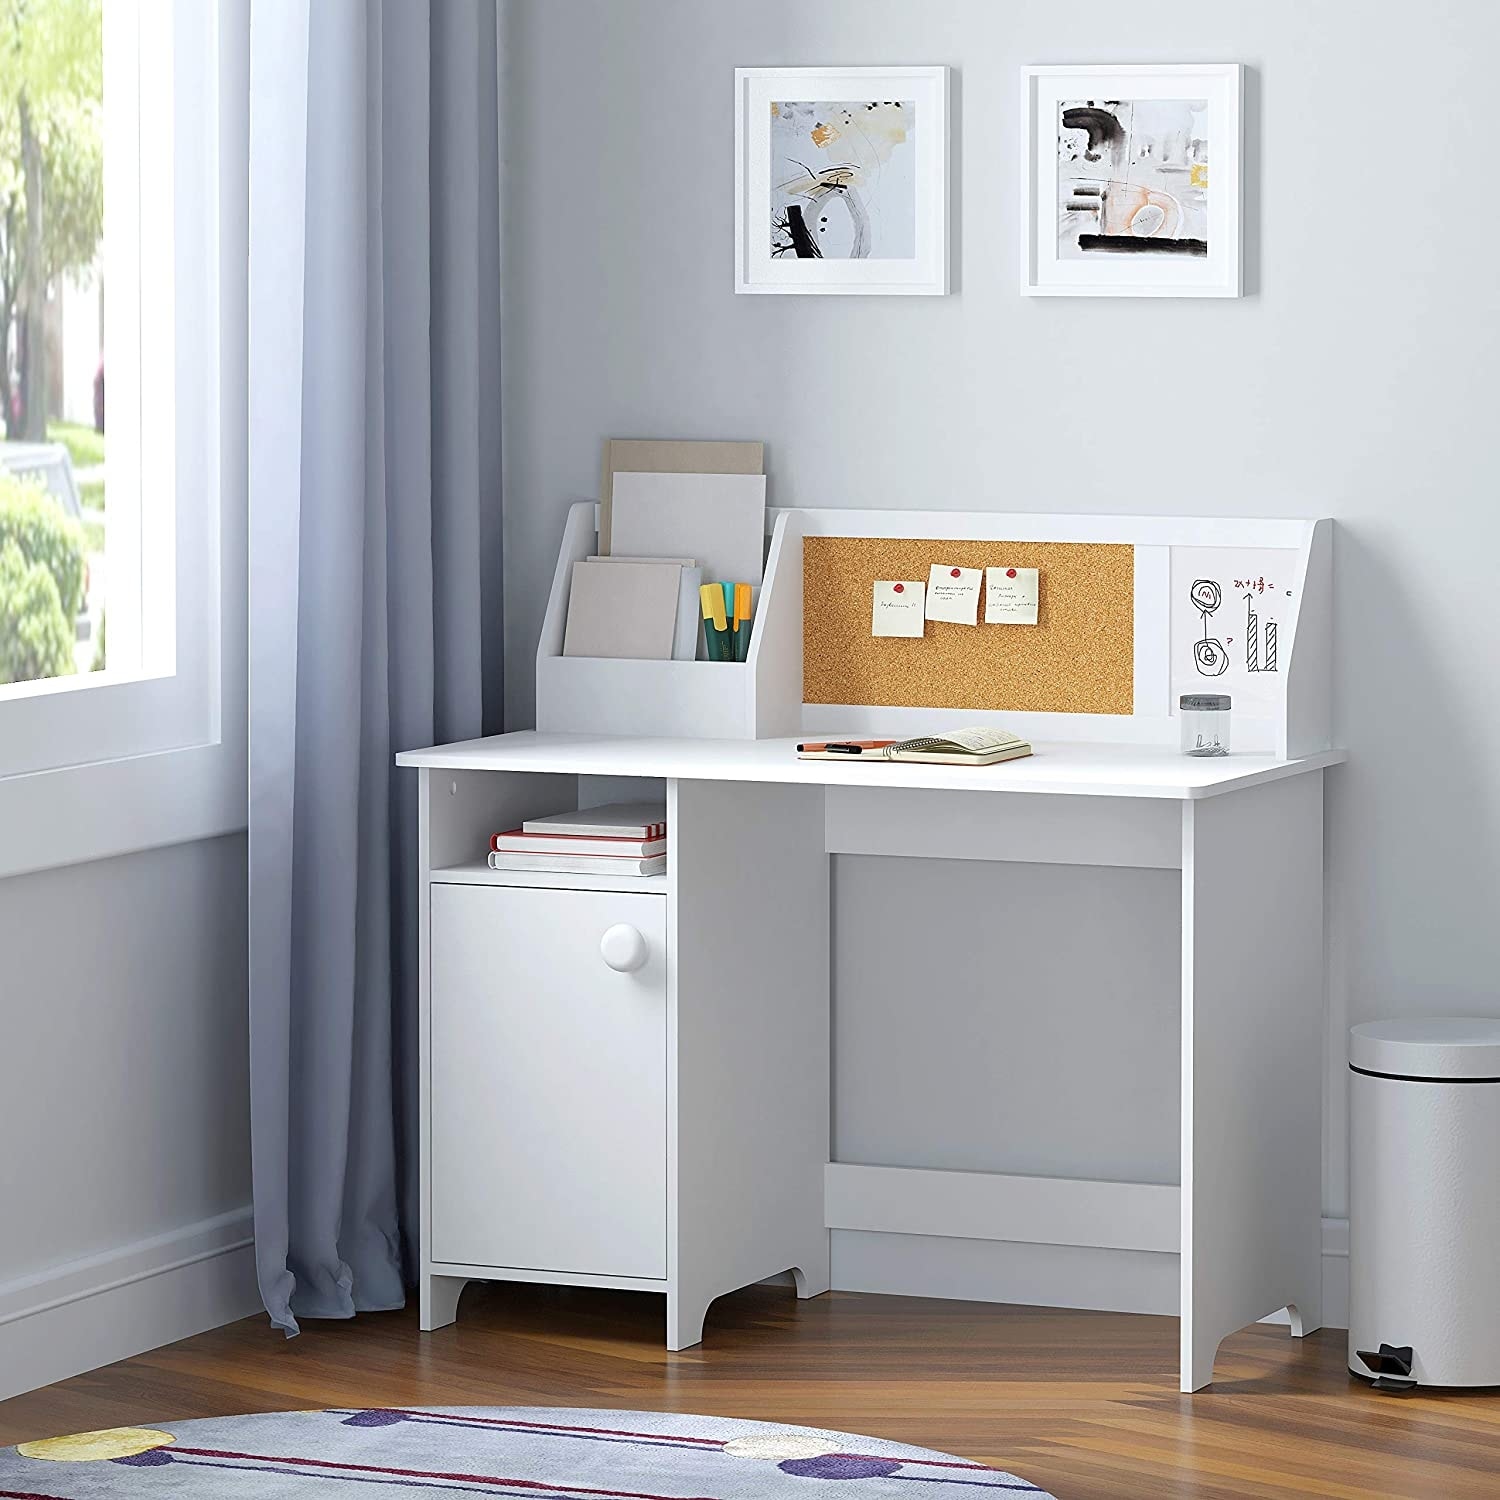 https://ak1.ostkcdn.com/images/products/is/images/direct/21b6bdceffbf64f3b17e17b0c10efe01a5f4c25f/UTEX-Kids-Study-Desk-with-Storage%2C-Wooden-Children-School-Study-Table%2C-Student%27s-Study-Computer-Workstation-Writing-Table%2C-White.jpg